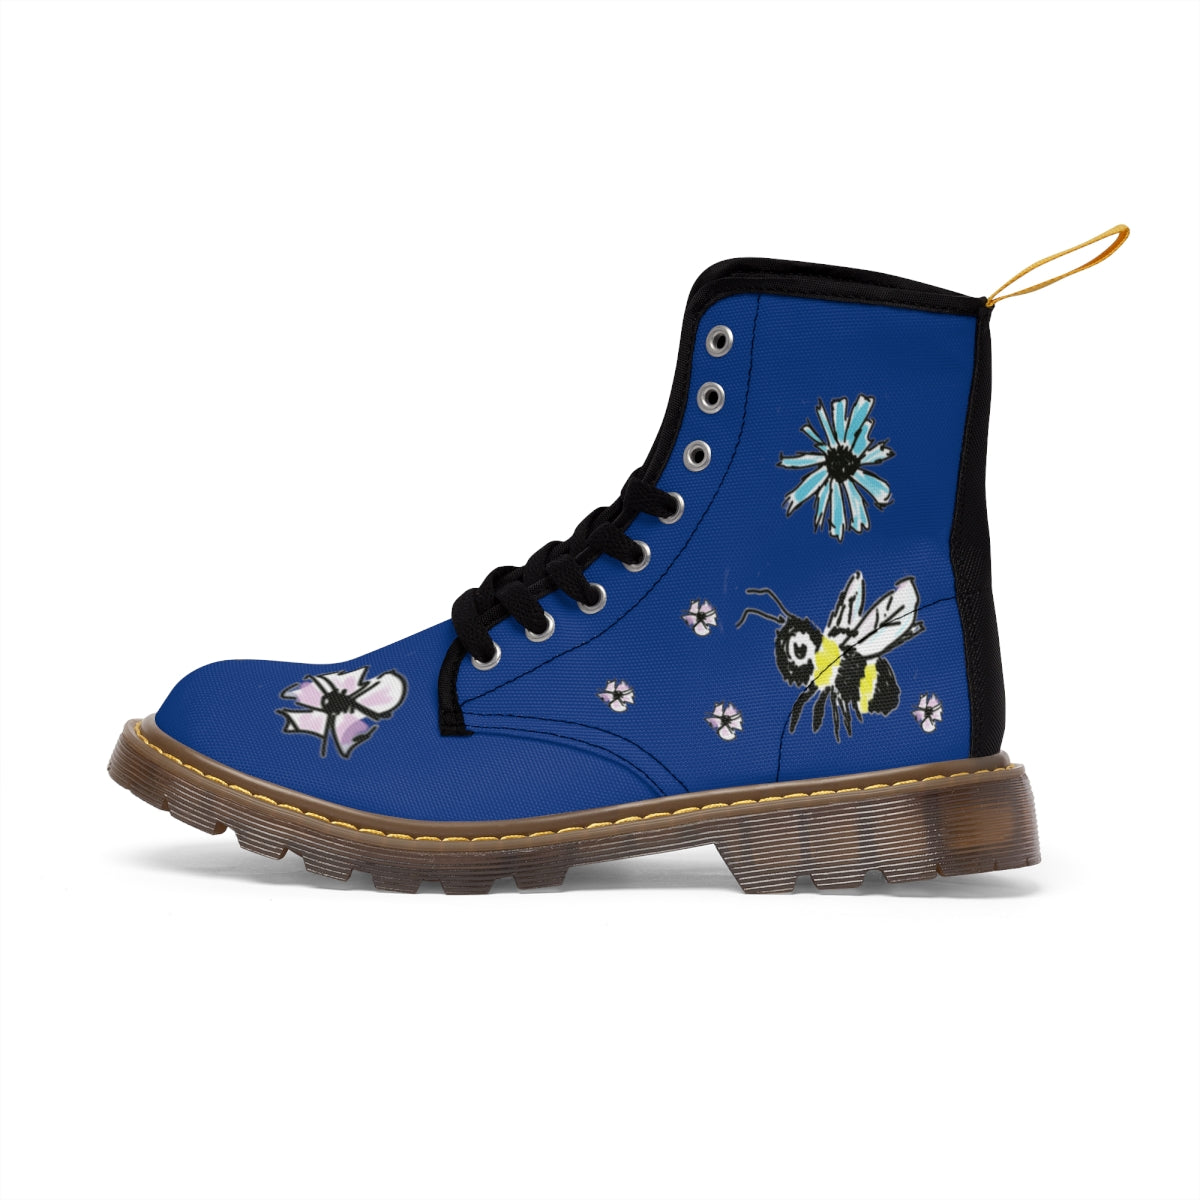 Scratch Drawn Bee Women's Canvas Boots Shoes Bee boots Blue boots combat boots fun womens boots original art boots Scratch Drawn Bee Shoes unique womens boots vegan boots vegan combat boots womens boots womens fashion boots